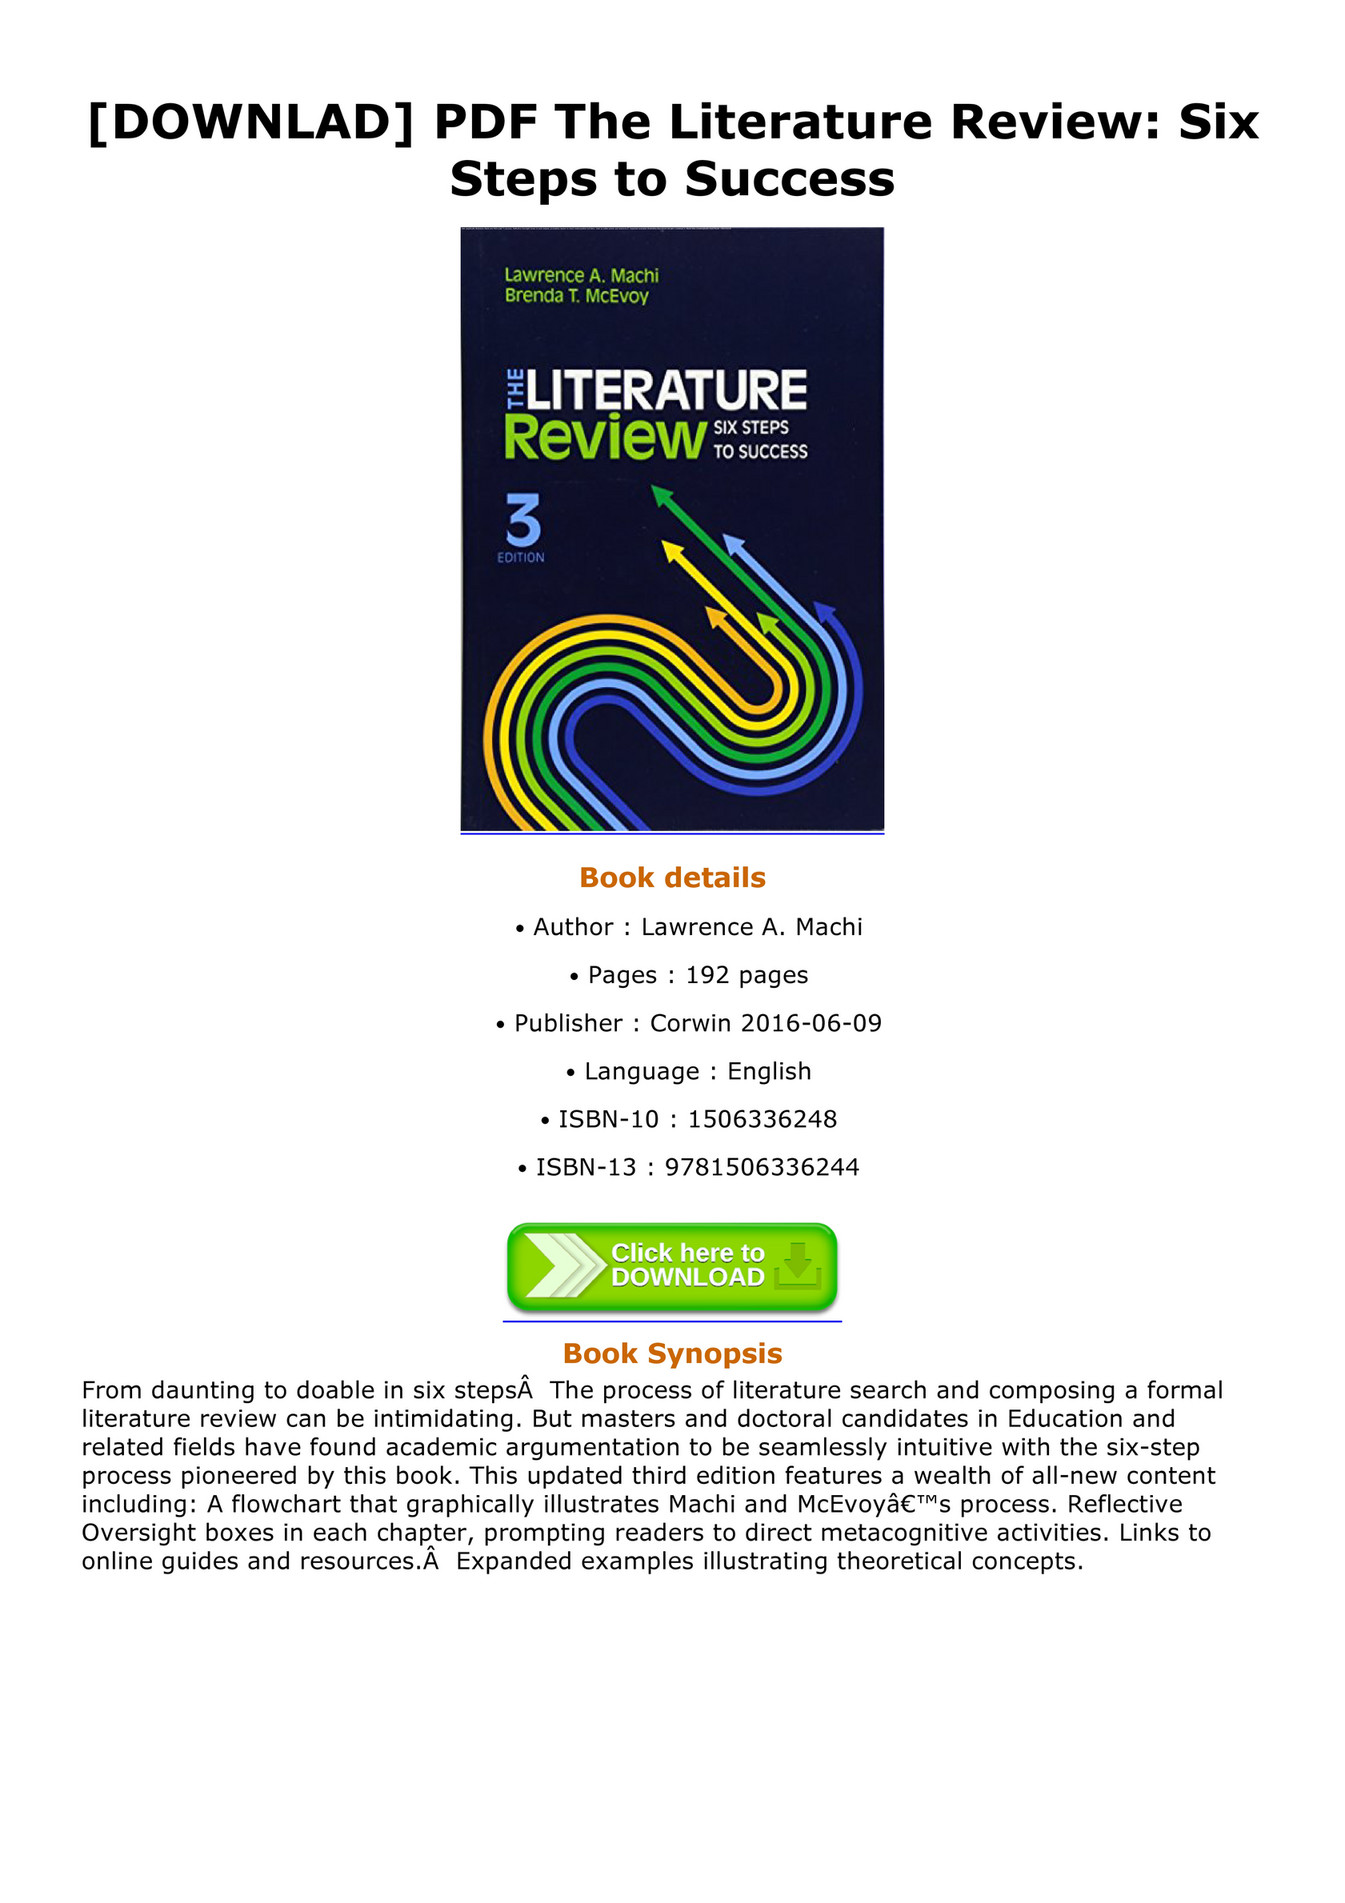 the literature review six steps to success pdf download